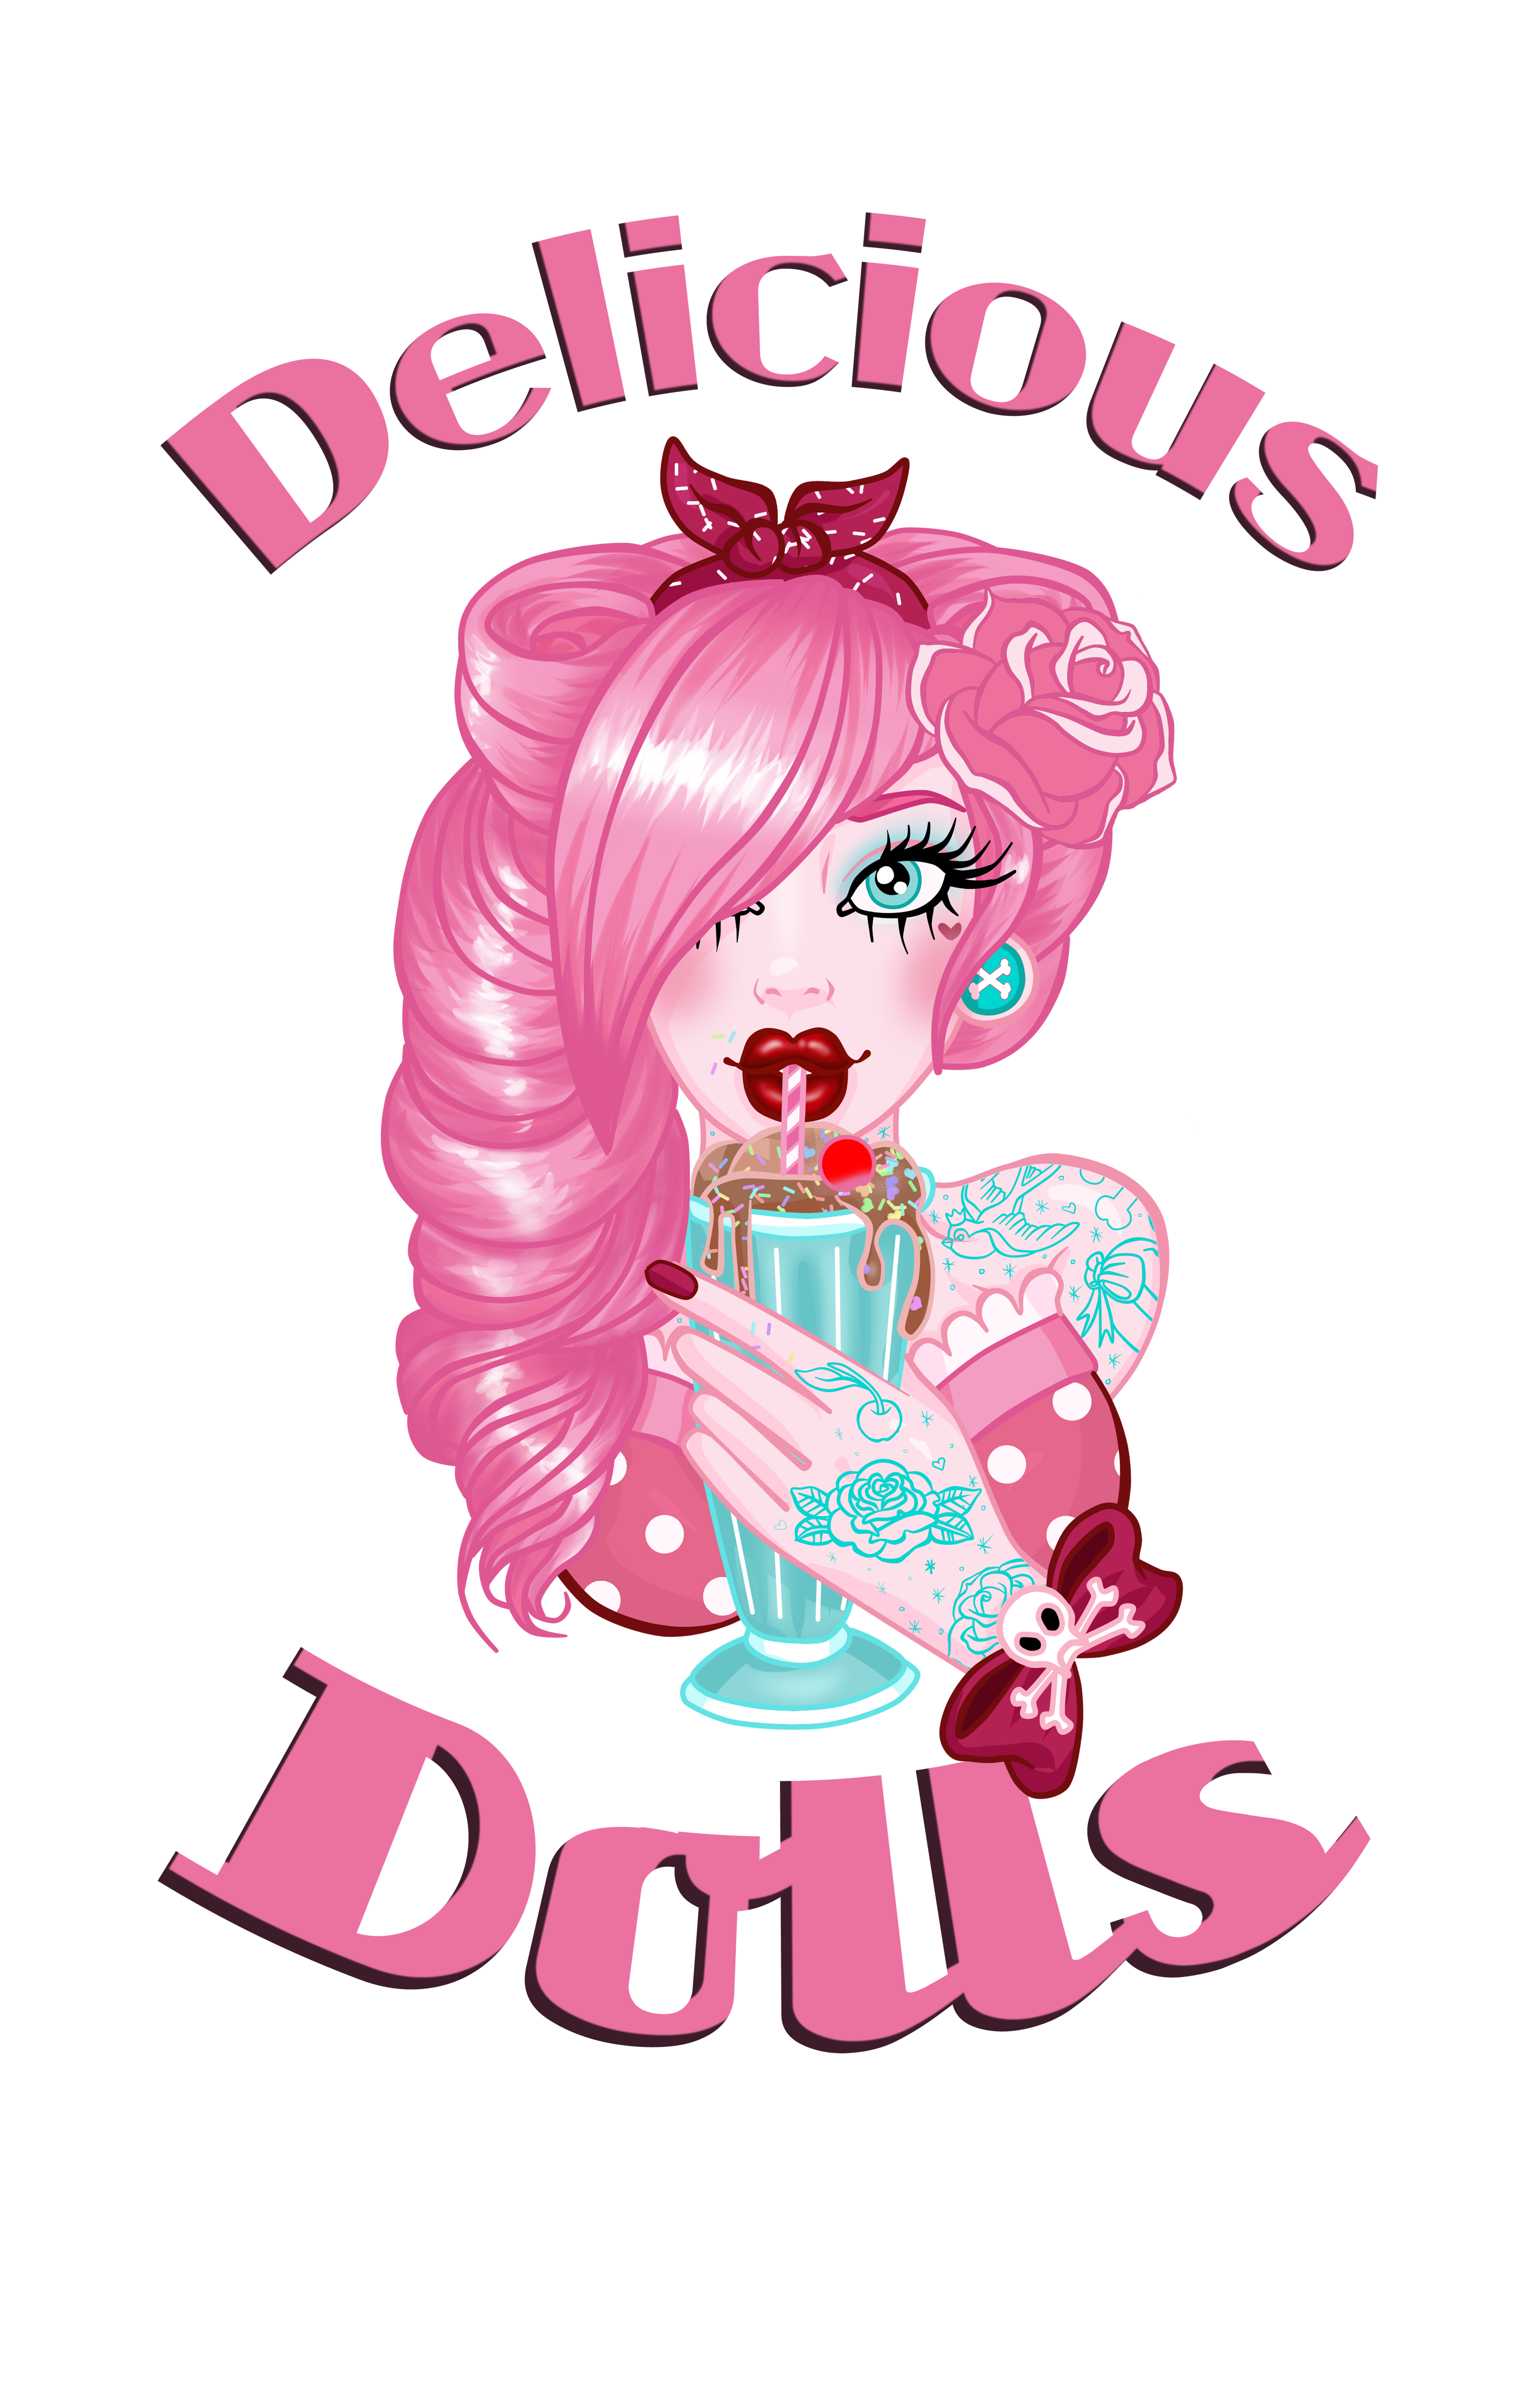 dolls clipart pink doll